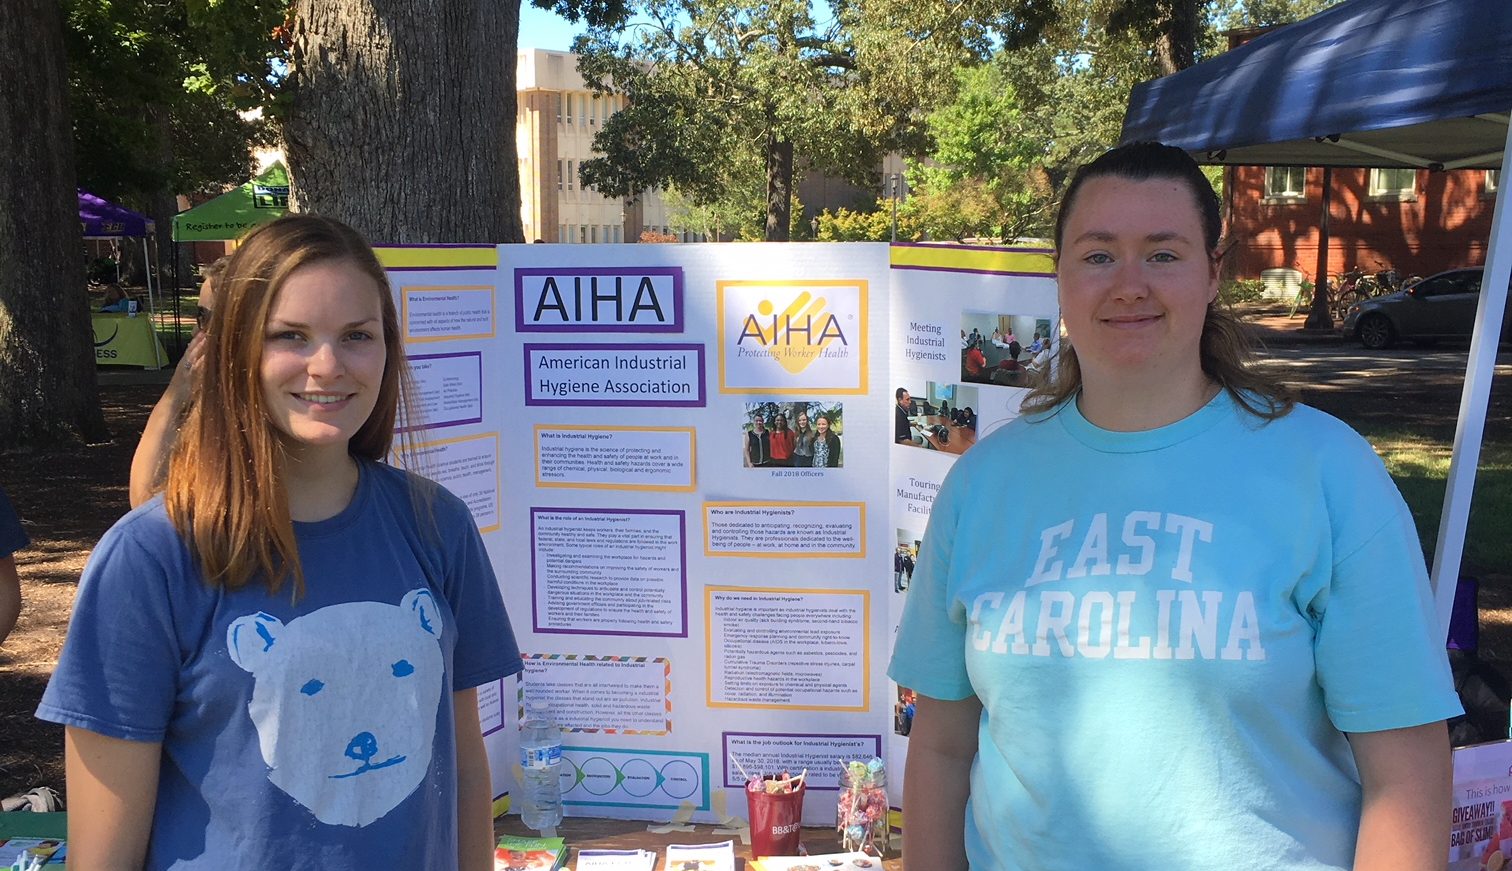 You are currently viewing AIHA ECU Student Section at Get A Clue Involvement Fair 2018